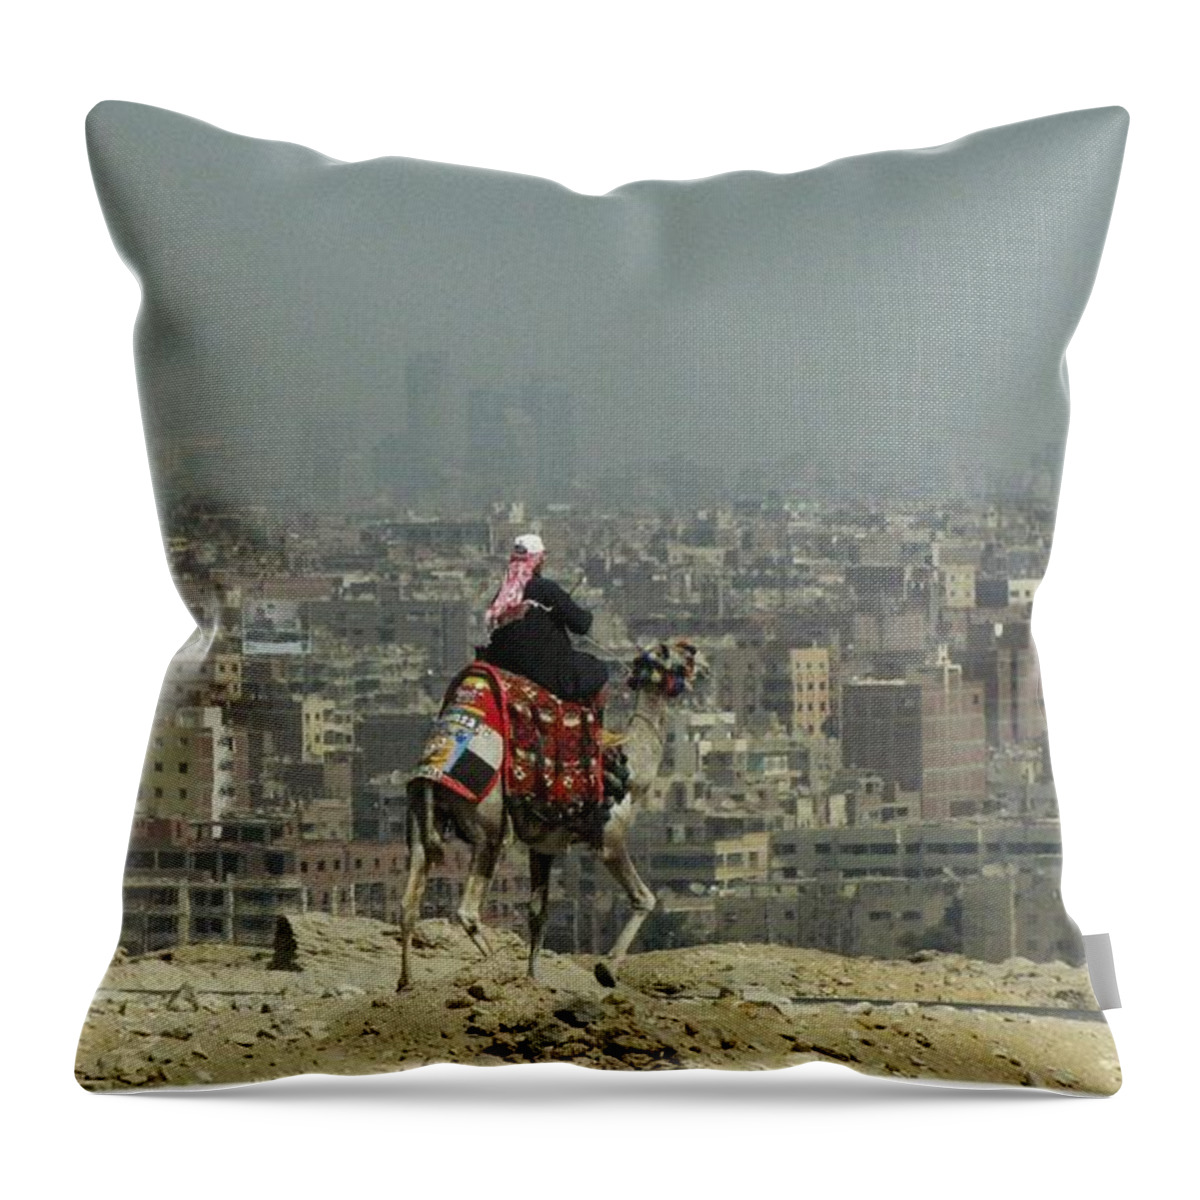 Camel Throw Pillow featuring the photograph Cairo Egypt by Jennifer Wheatley Wolf